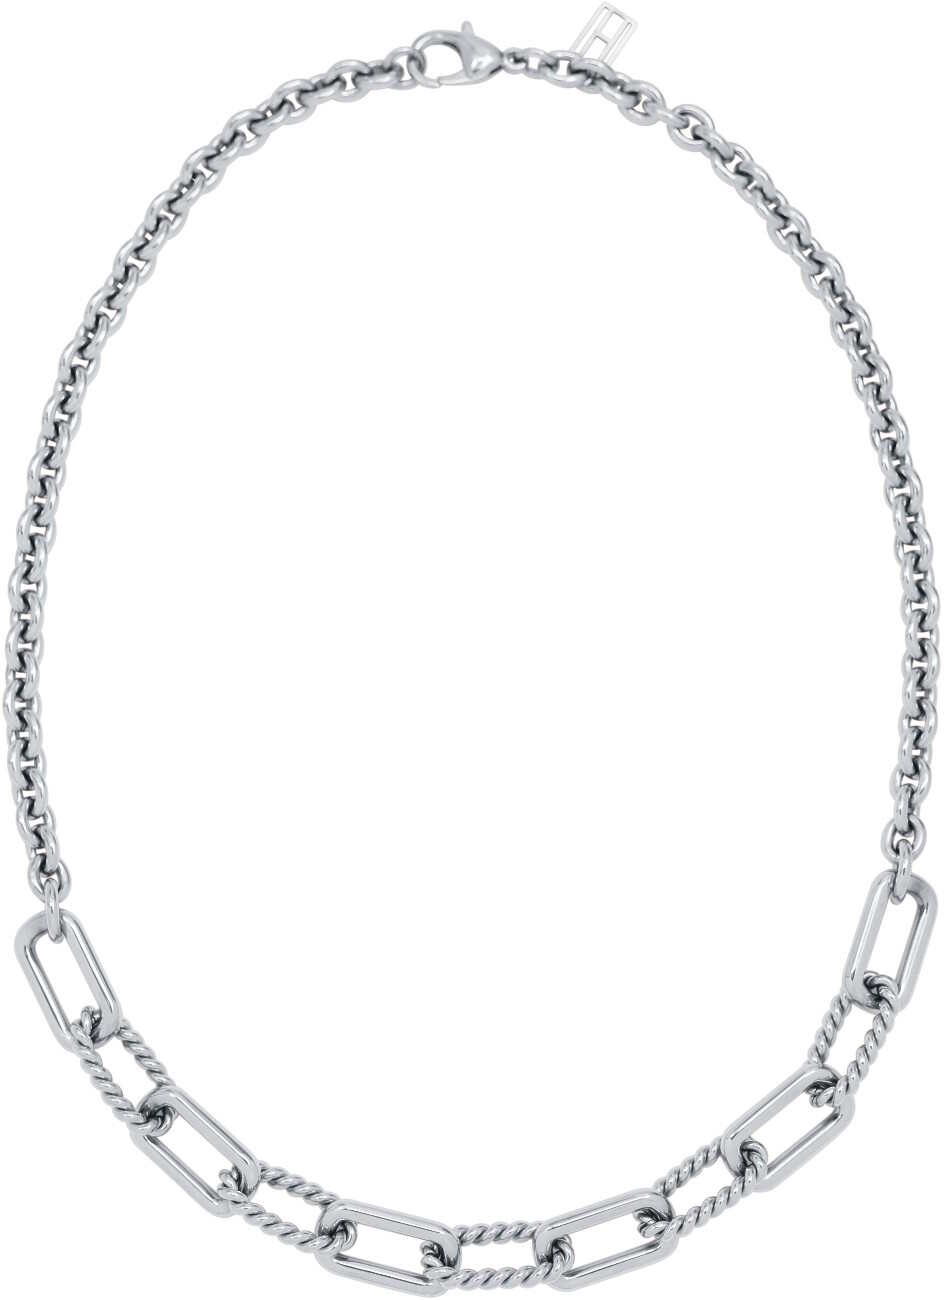 Tommy Hilfiger Men's Necklace 2790454 - GioielleriaLucchese.it